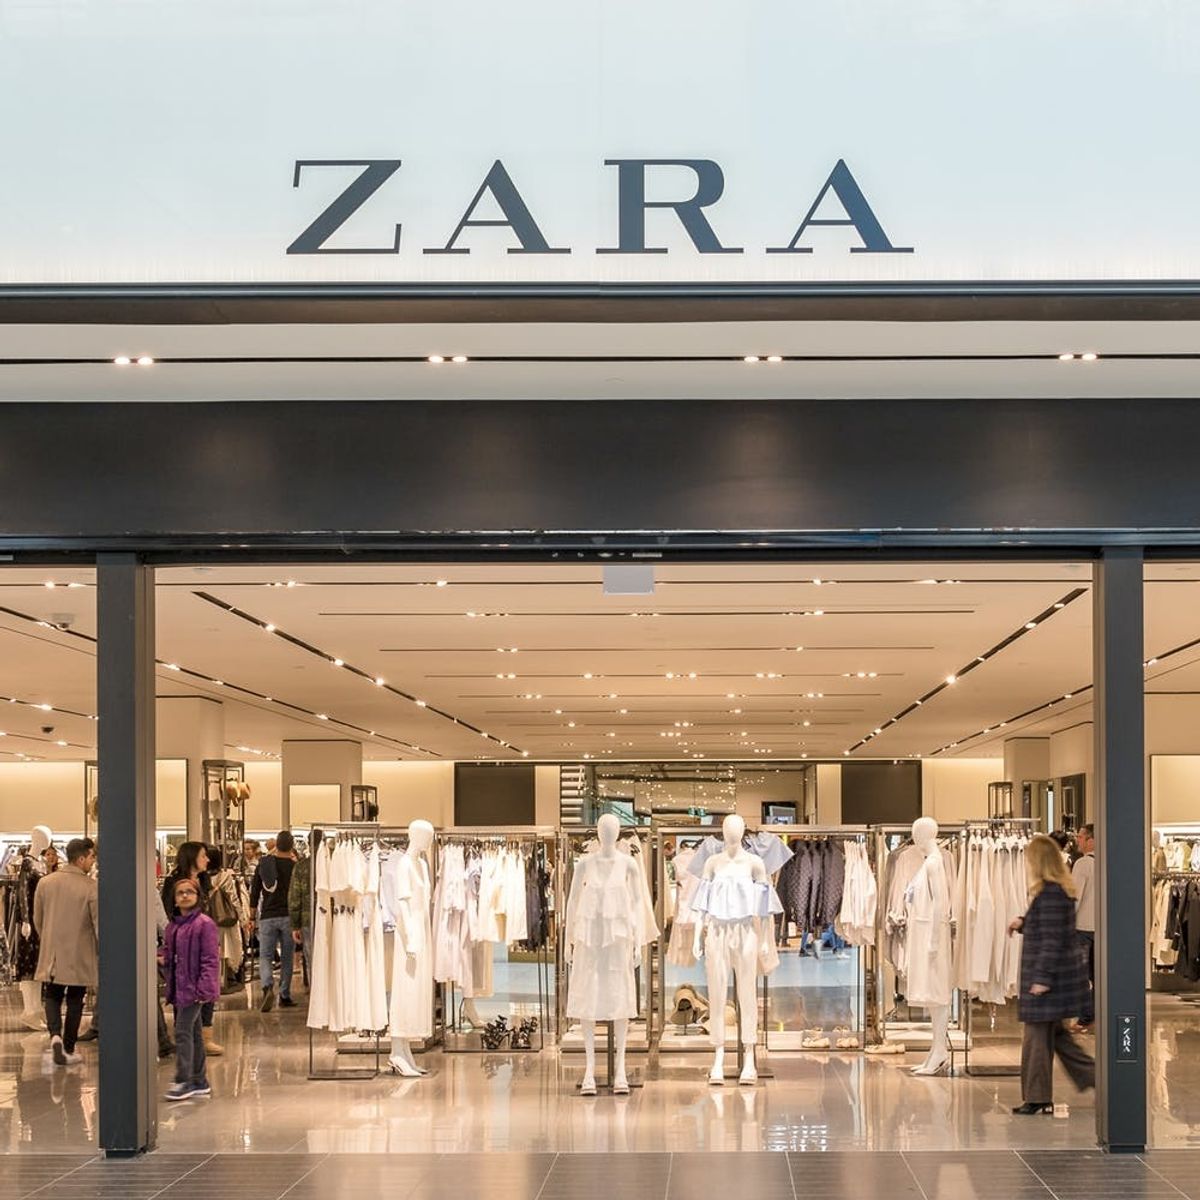 Zara’s Love Your Curves Campaign Has Folks Outraged